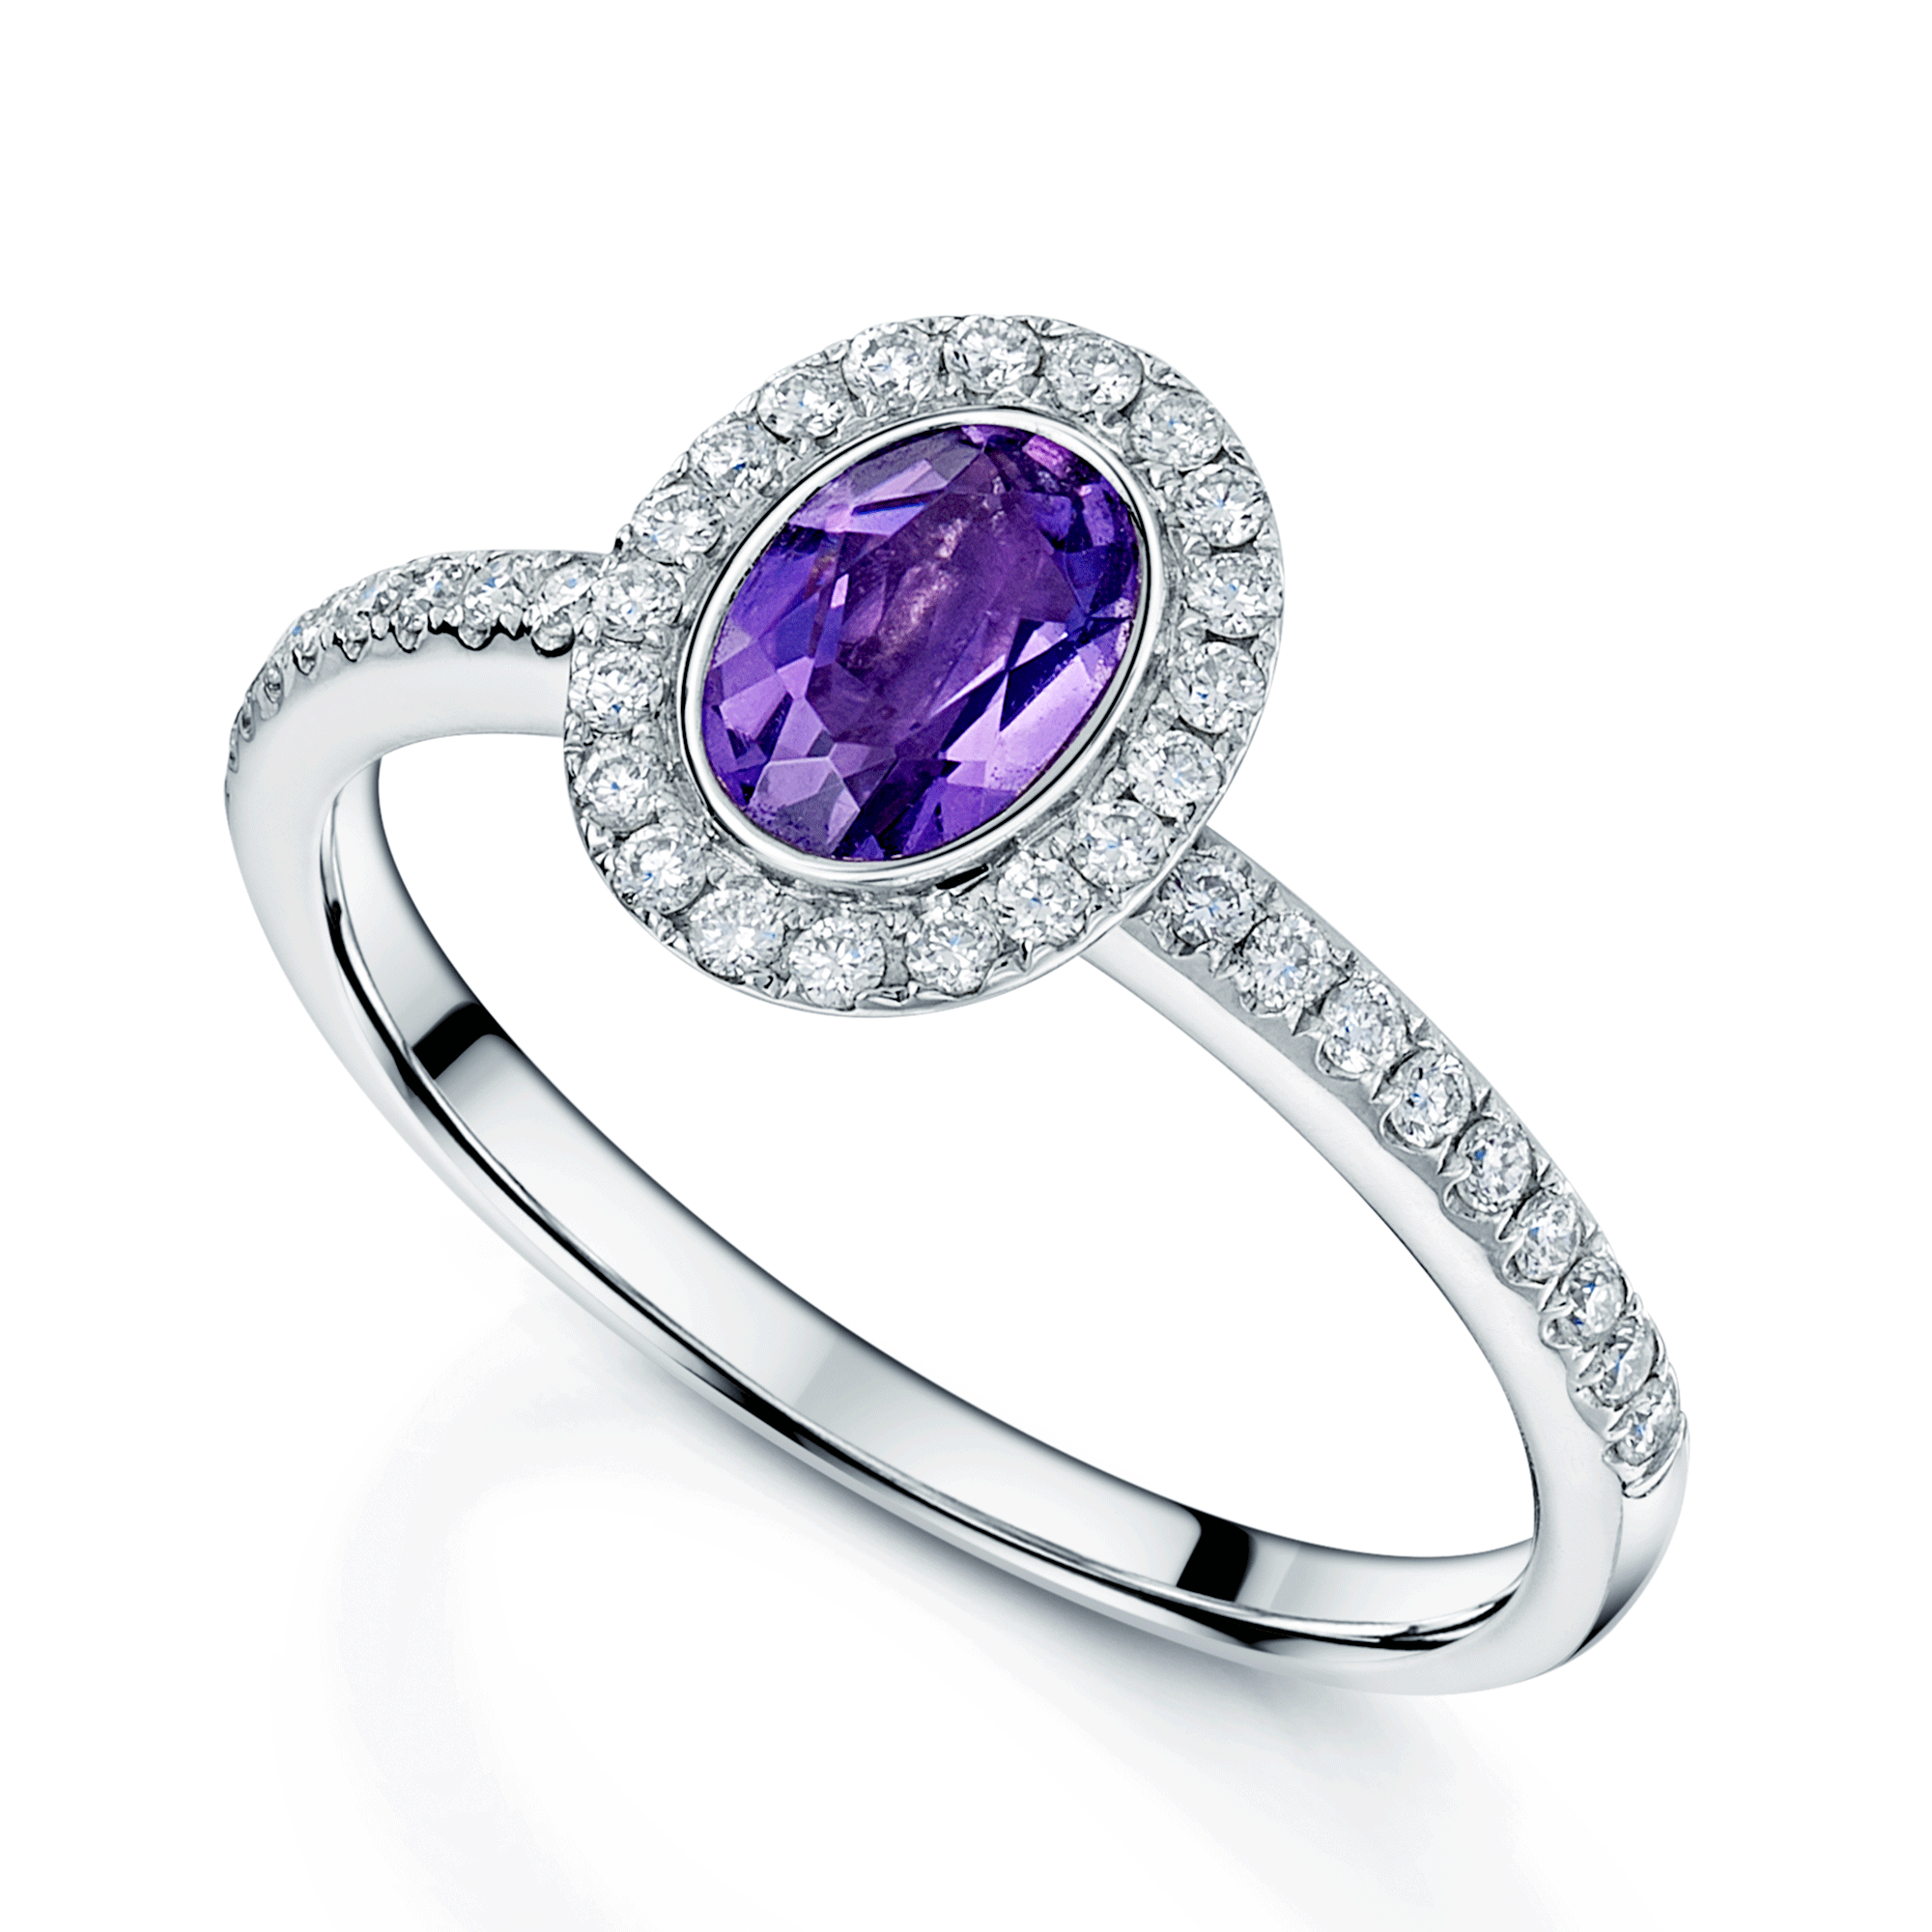 18ct White Gold Oval Cut Amethyst And Diamond Halo Ring